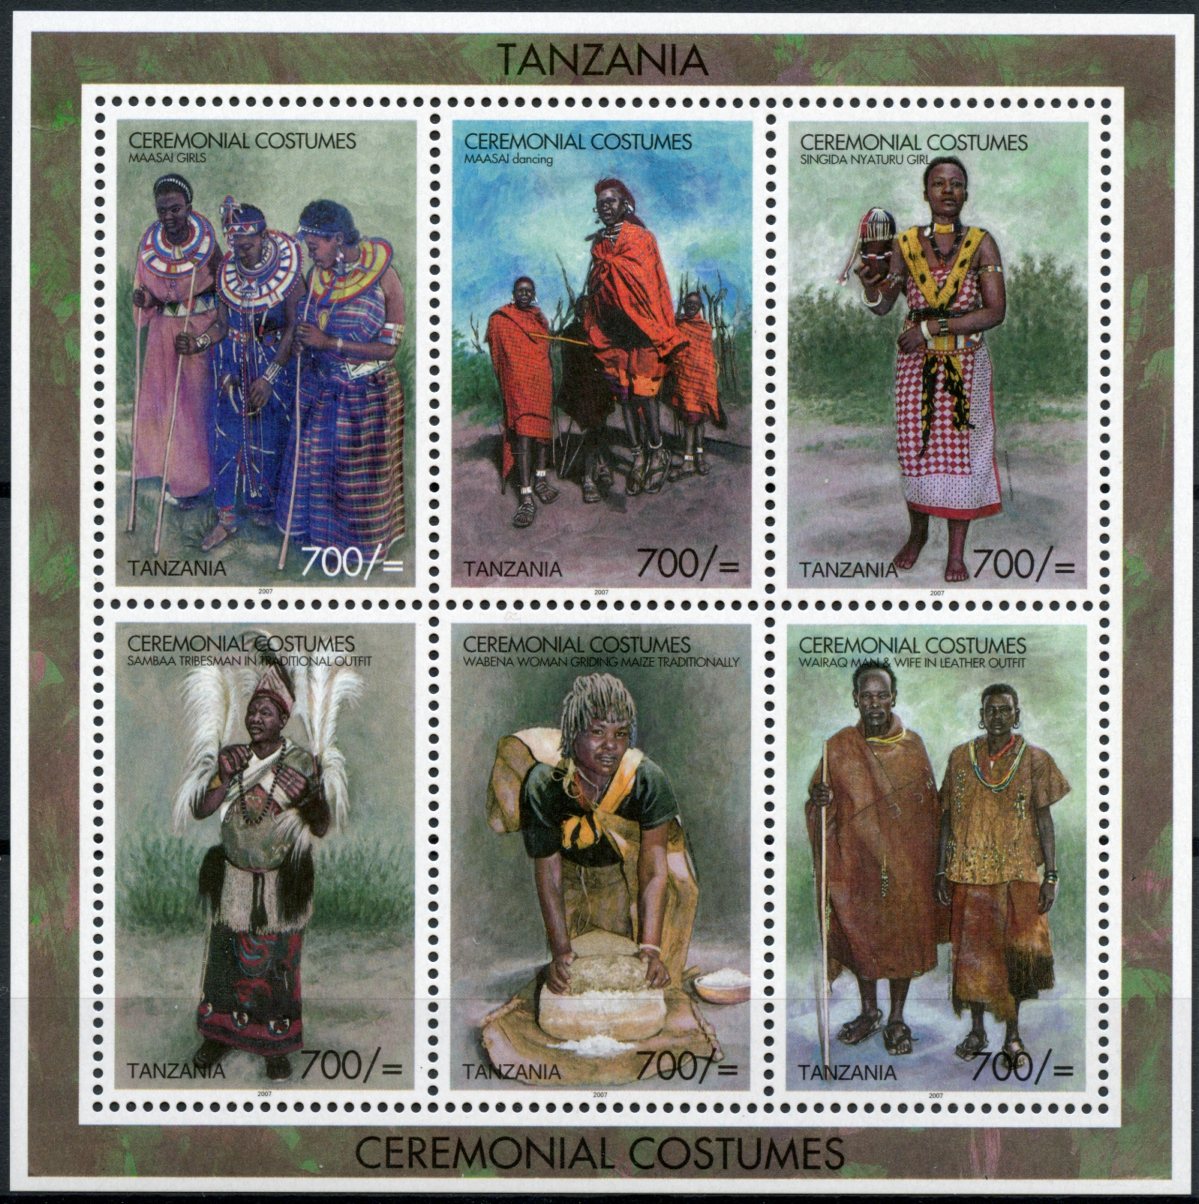 Tanzania Cultures & Traditions Stamps 2008 MNH Ceremonial Costumes Maasai 6v M/S